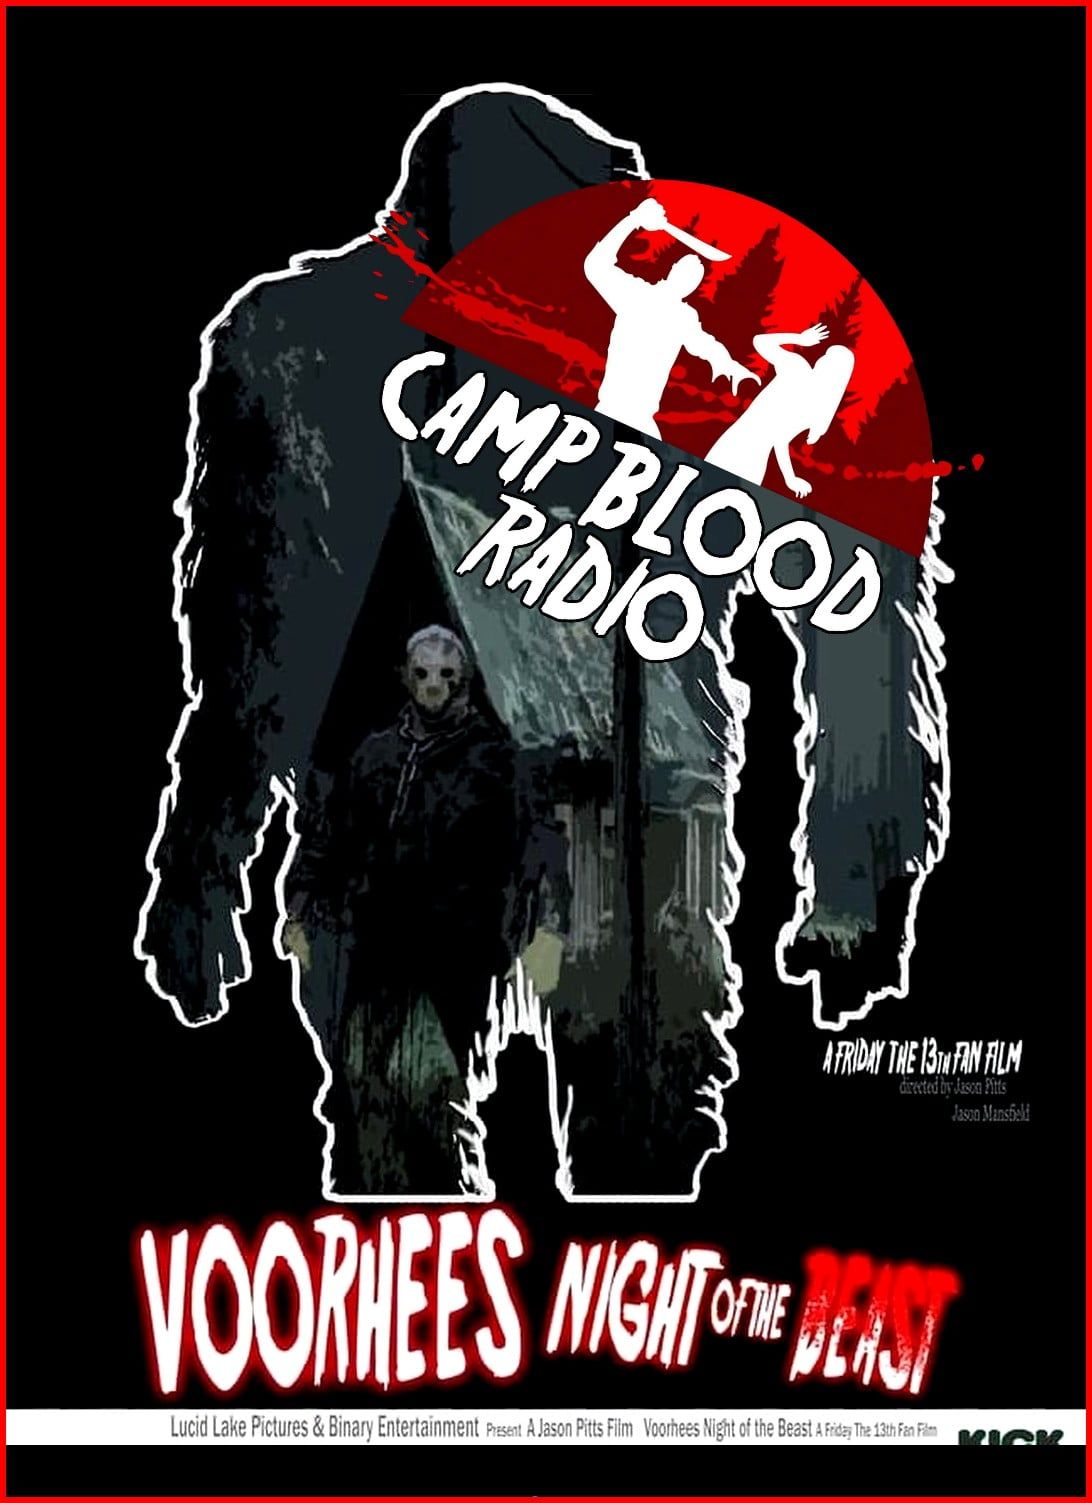 Thoughts on Voorhees Night of the Beast: Jason v.s Bigfoot